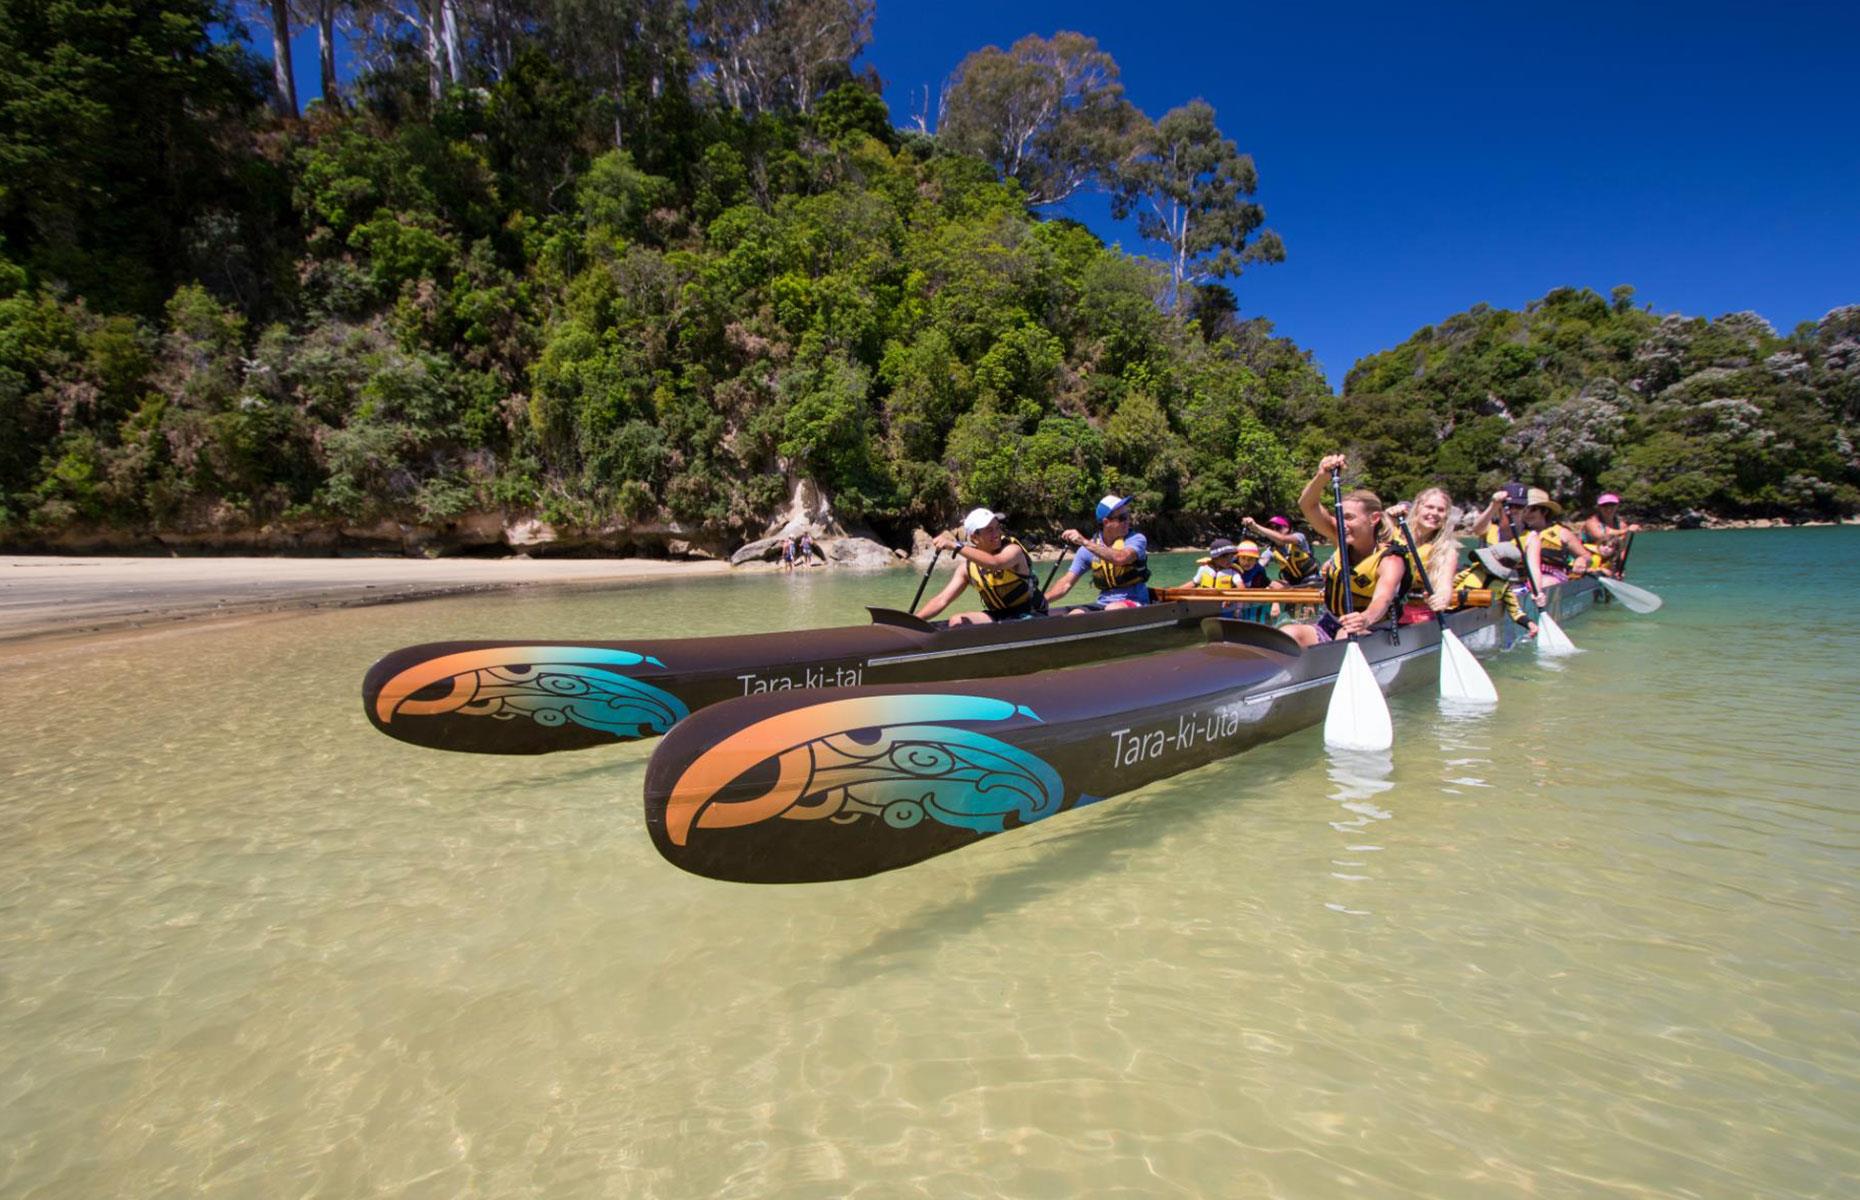 <p>More than 800 years ago Māori arrived in New Zealand on waka (canoes) from eastern Polynesia. Learning about Māori heritage while paddling as a team along the beautiful Abel Tasman coast in single or double-hulled outrigger canoes is a special experience. Visitors learn the etiquette (tikanga) associated with waka before beginning the journey along the coast to Split Apple Rock. All trips also begin and end with a blessing (karakia) for protection.</p>